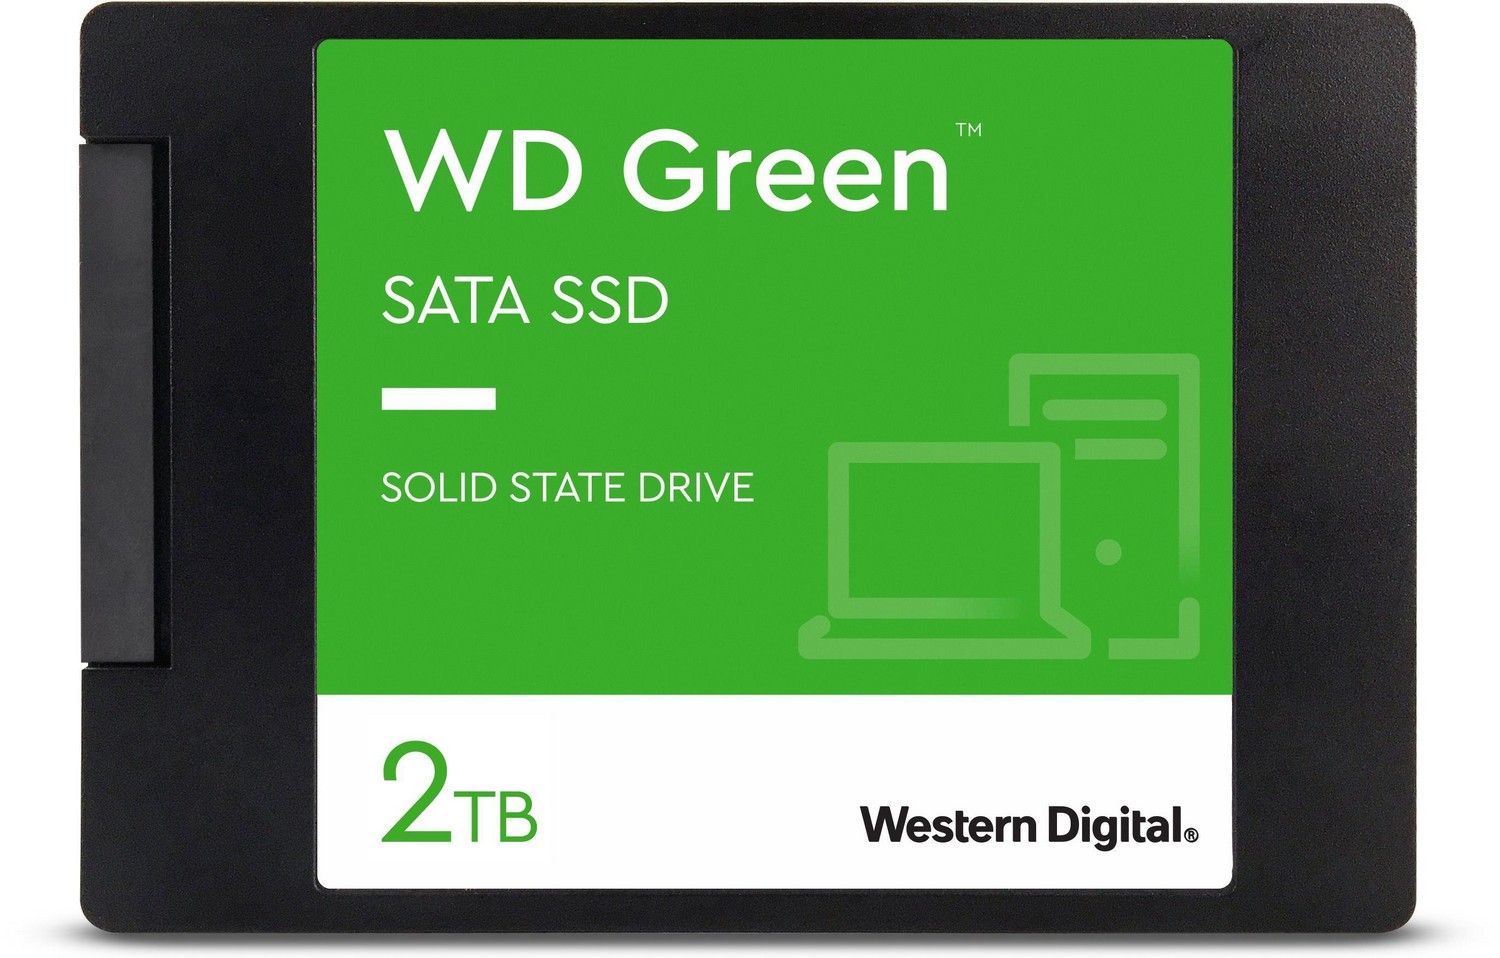 SSD-levy - WD Green SSD 2TB